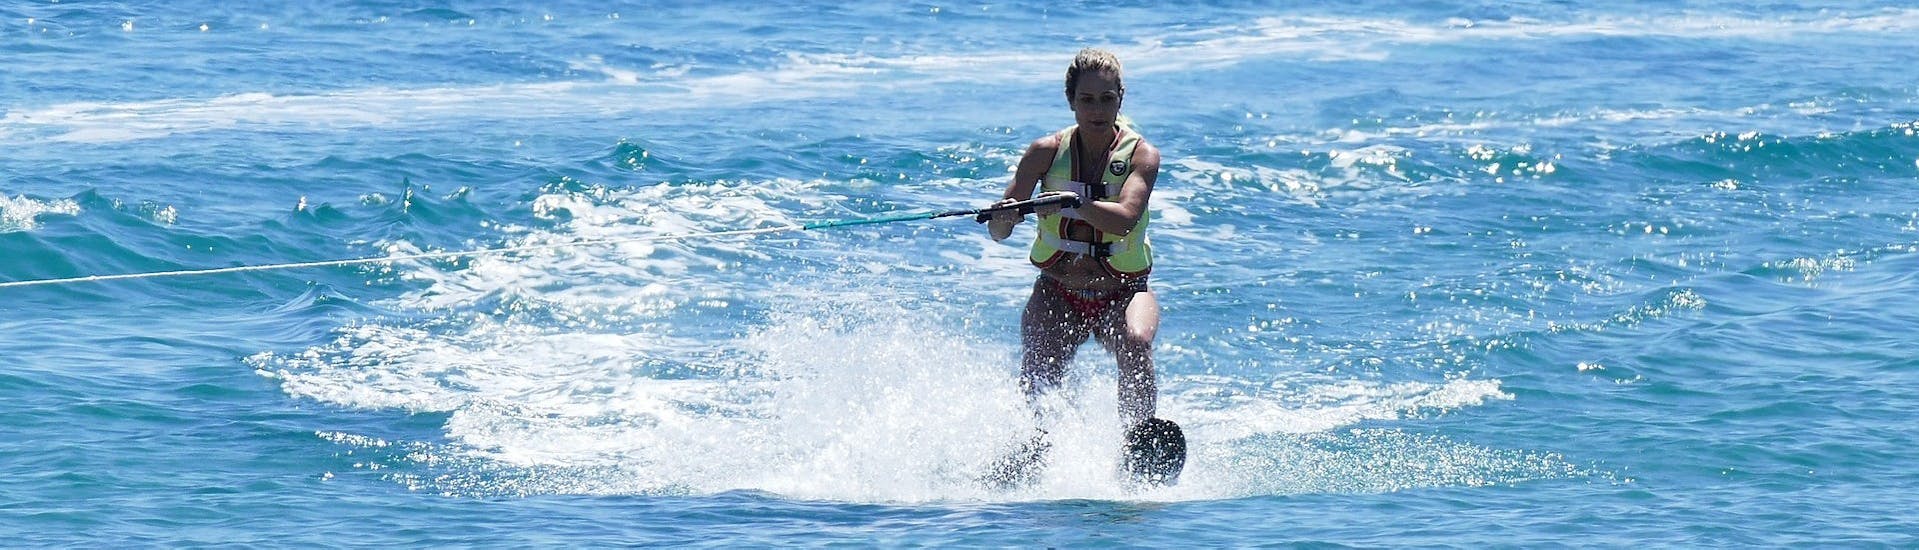 Woman stands on a water ski rented from St. Nicholas Beach Watersports.